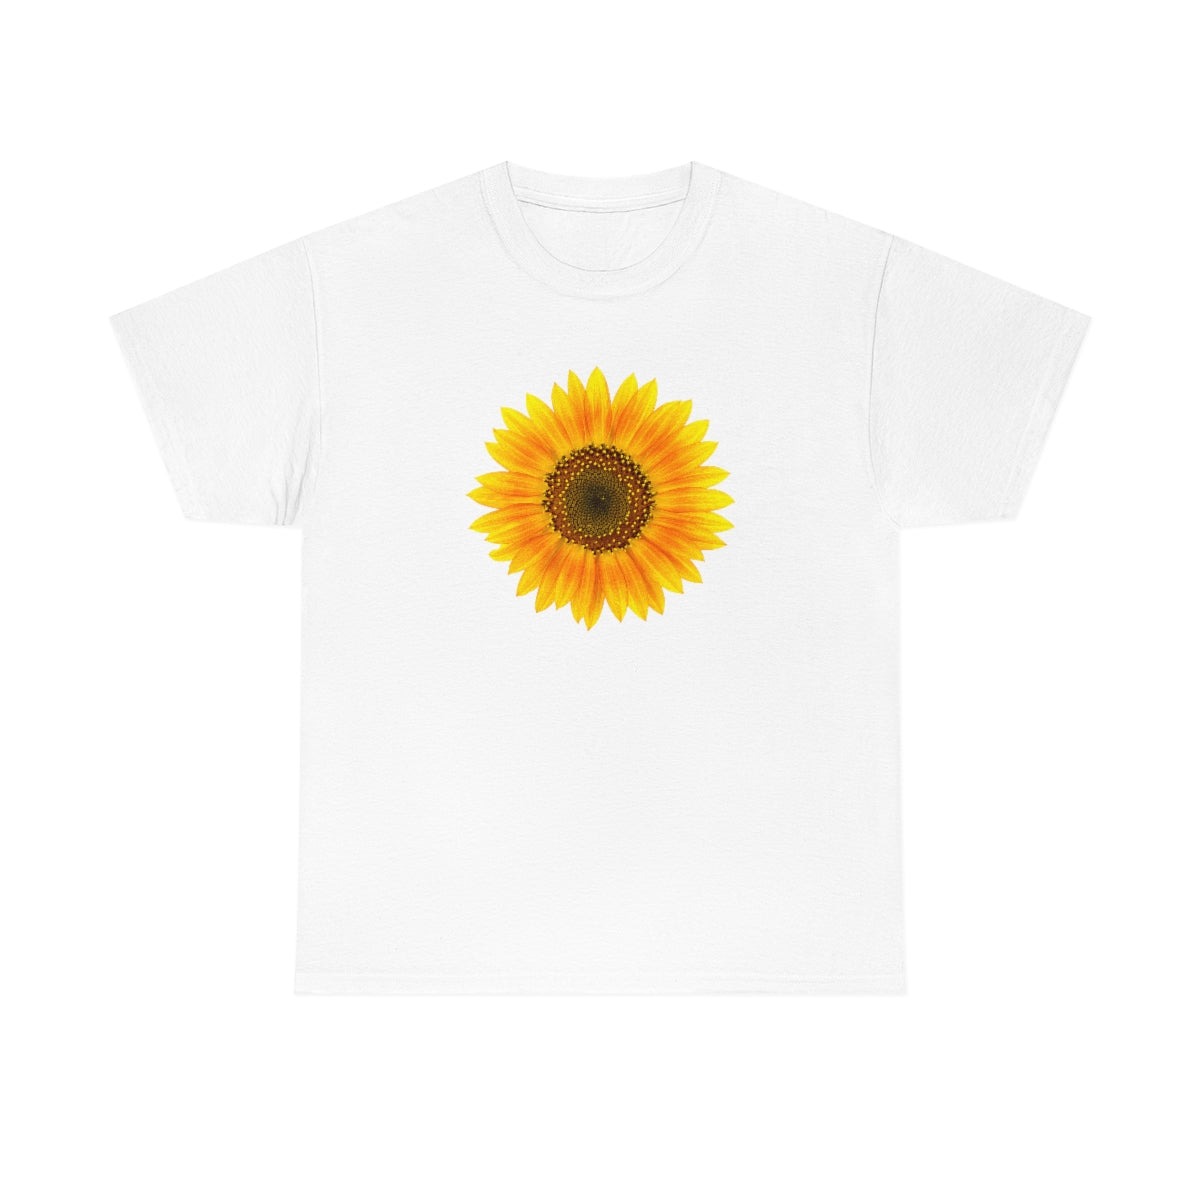 Flat front view of the White T-shirt